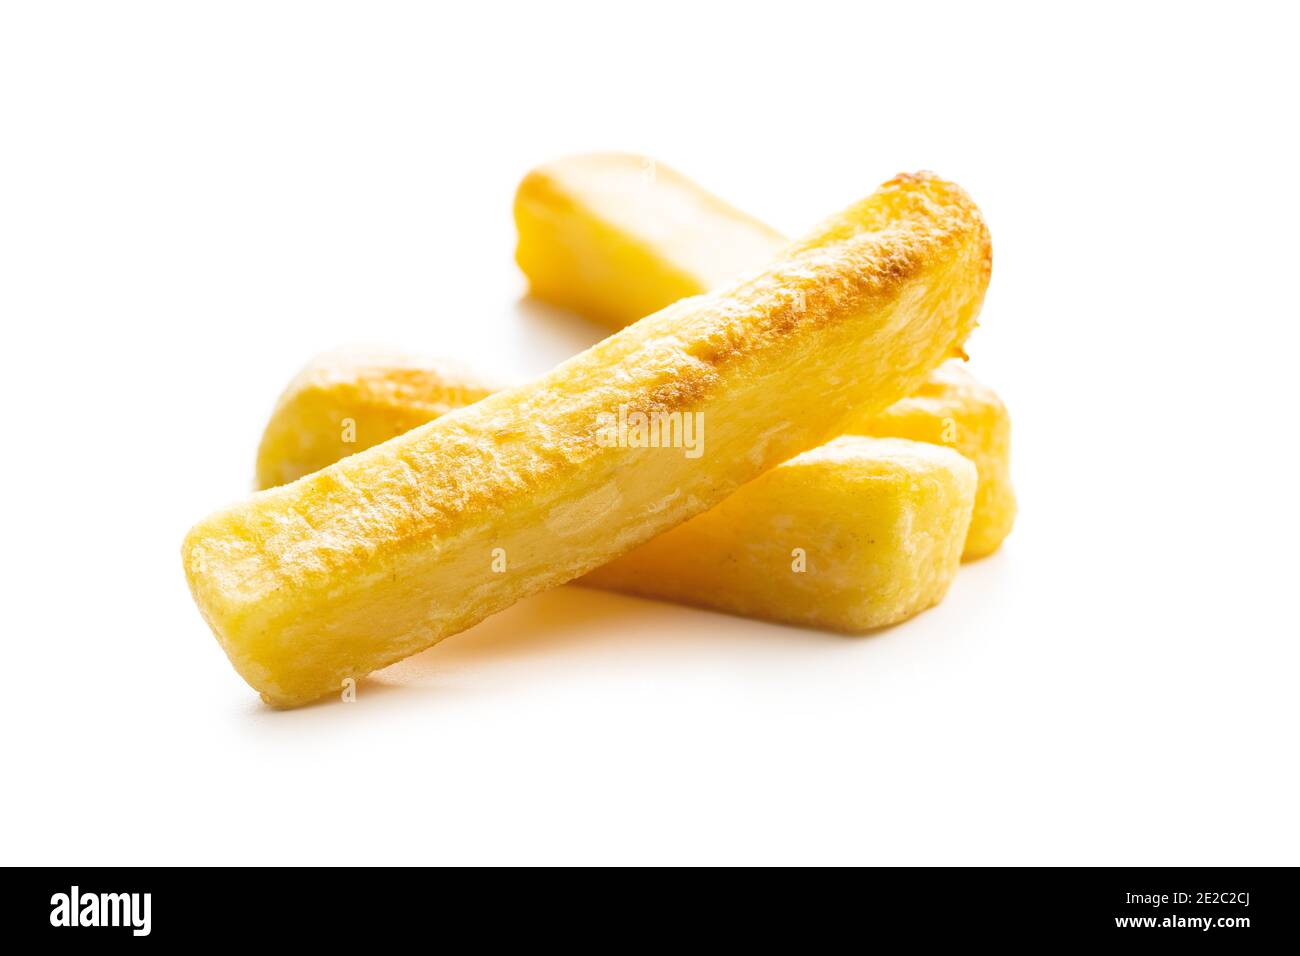 Big french fries. Fried potato chips isolated on white background. Stock Photo